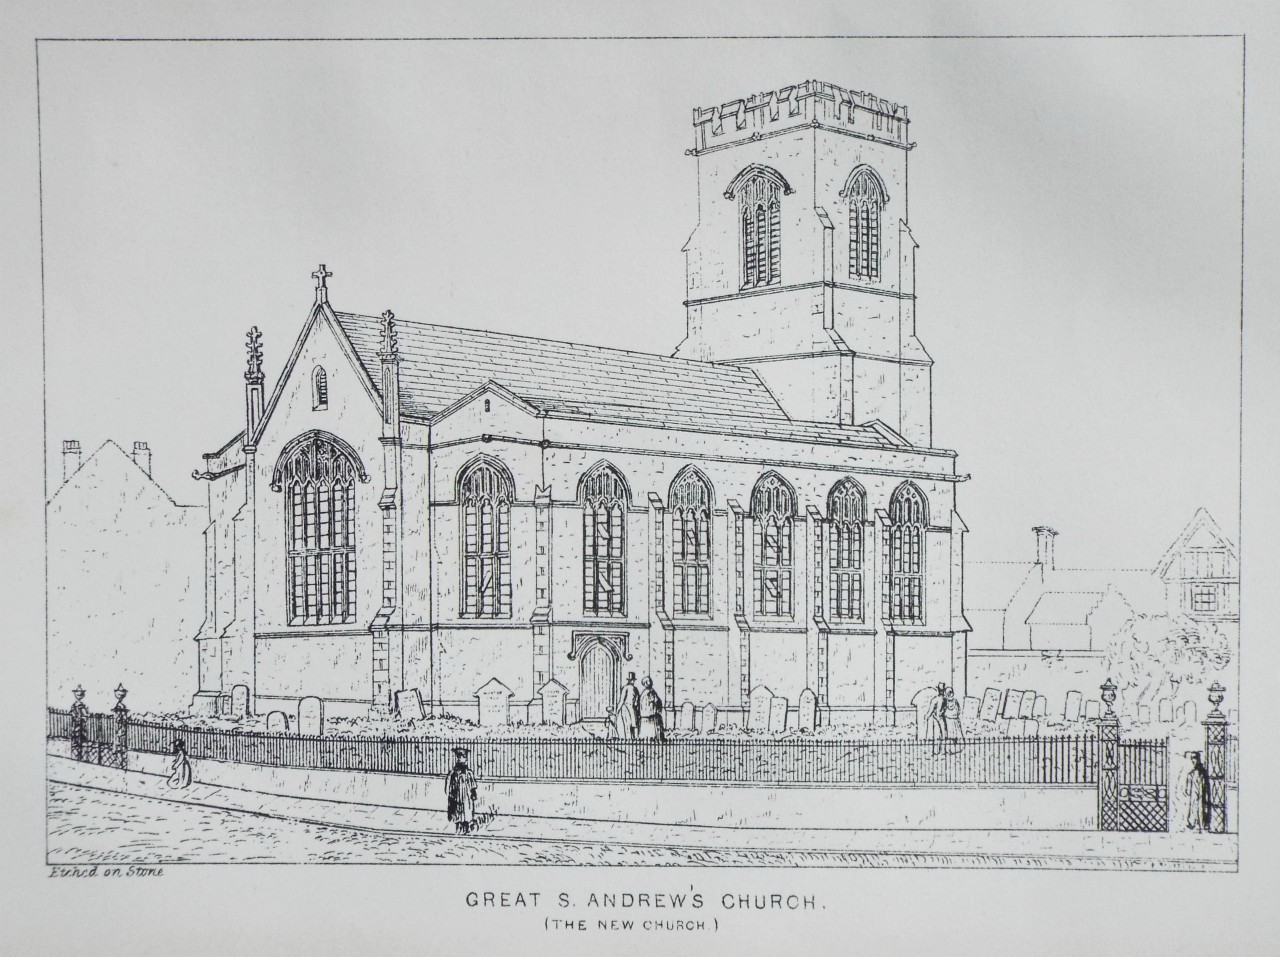 Lithograph - Great S. Andrew's Church. (The New Church.)